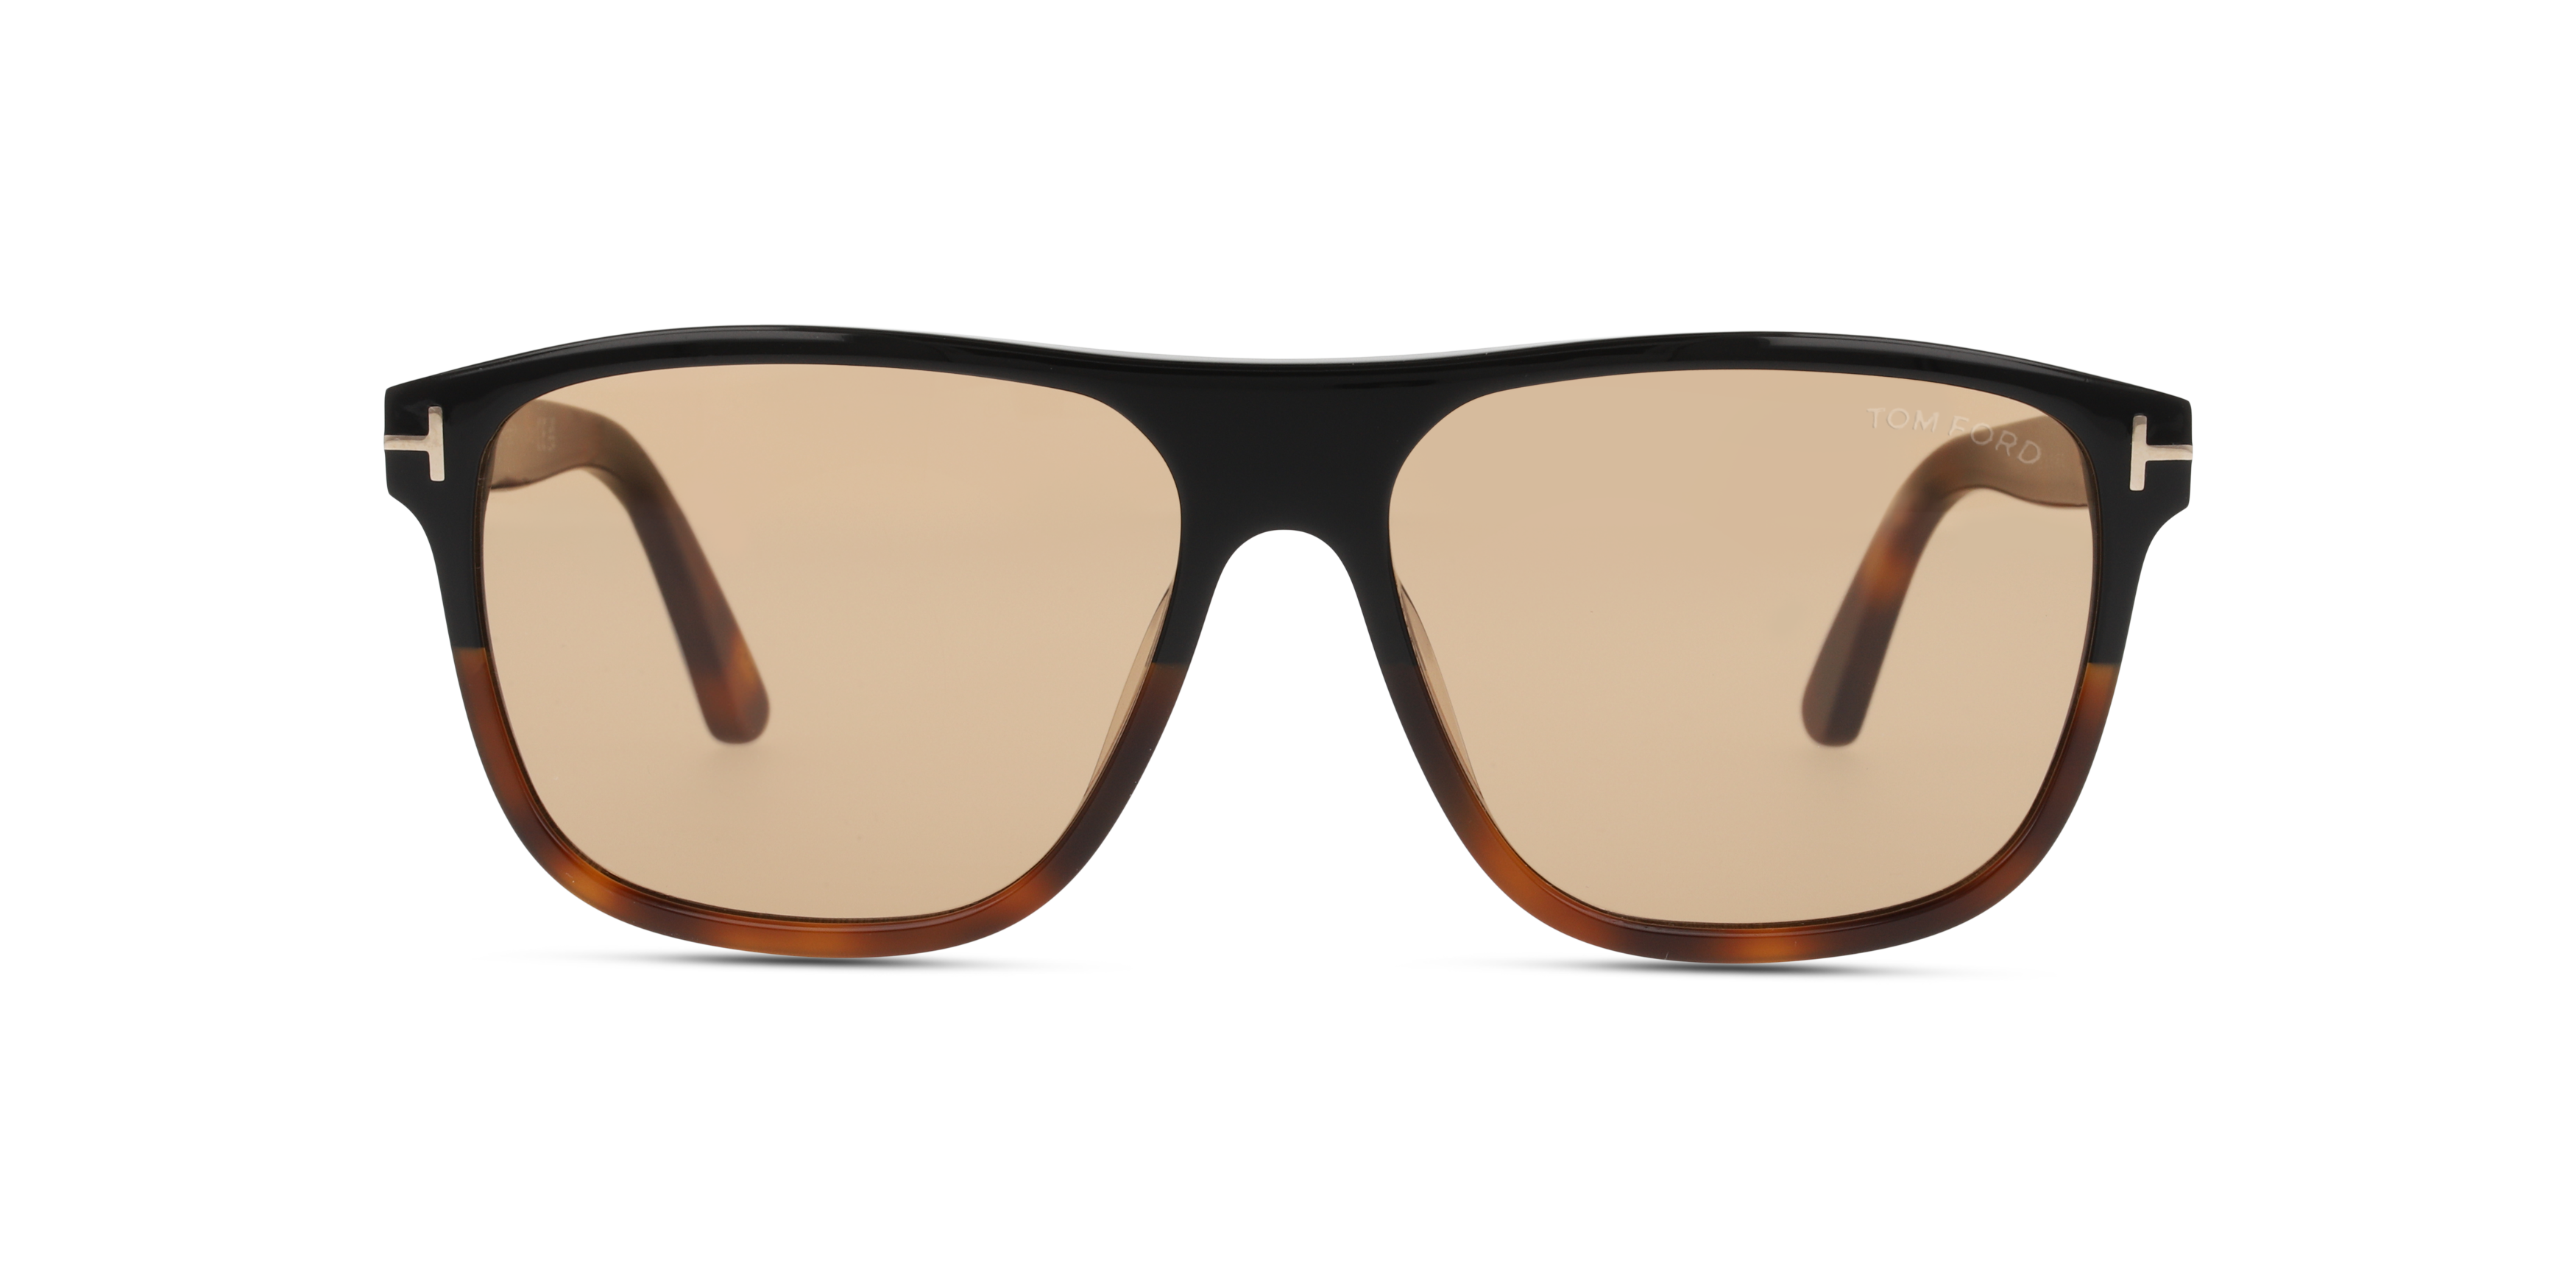 [products.image.front] Tom Ford FT 1081 Sunglasses